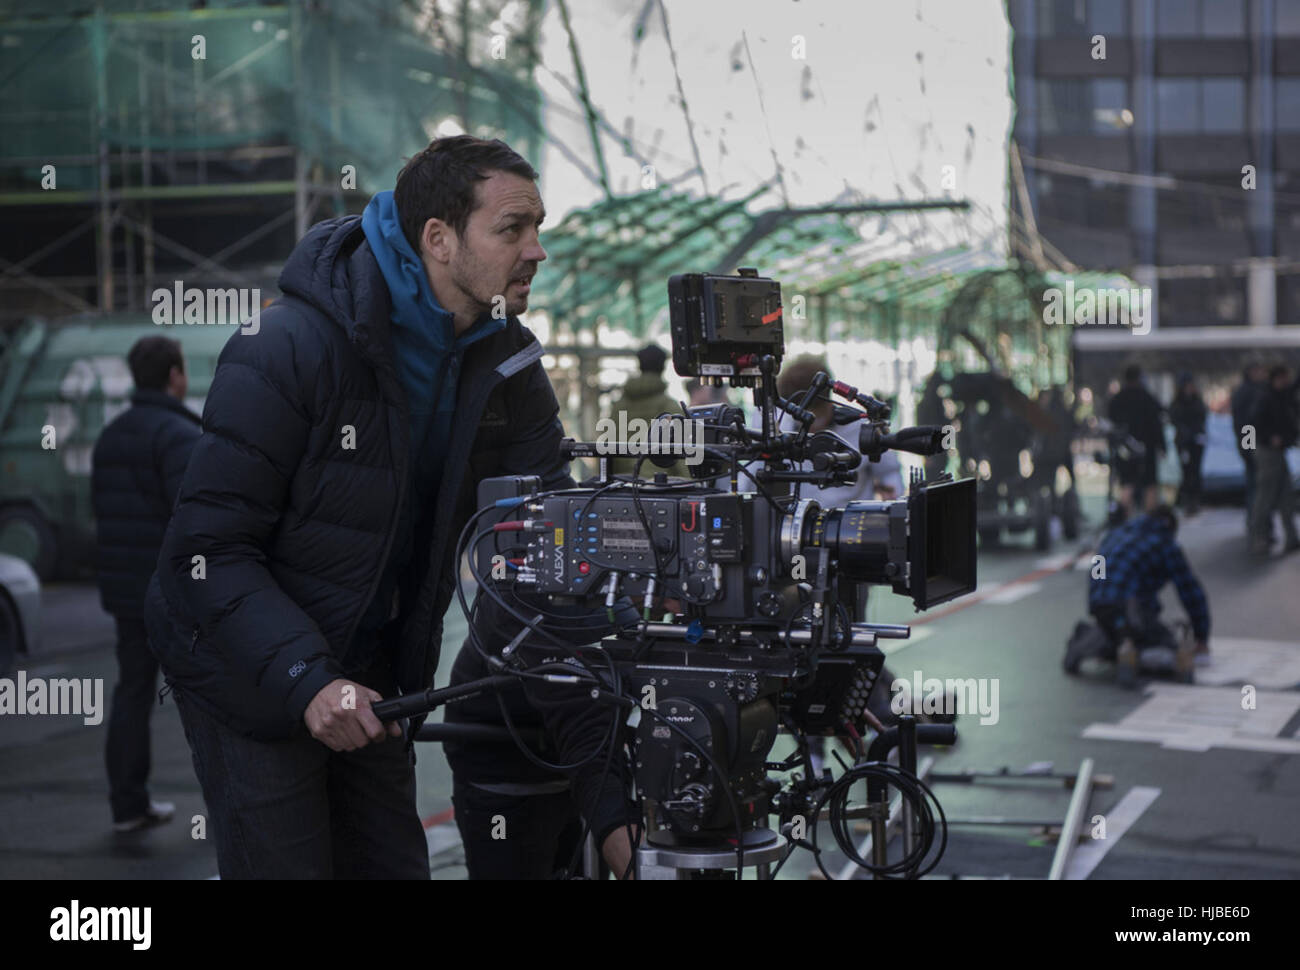 GHOST IN THE SHELL (ON SET) (2017) RUPERT SANDERS (DIR) UNIVERSAL PICTURES/COLLECTION MOVIESTORE LTD Banque D'Images